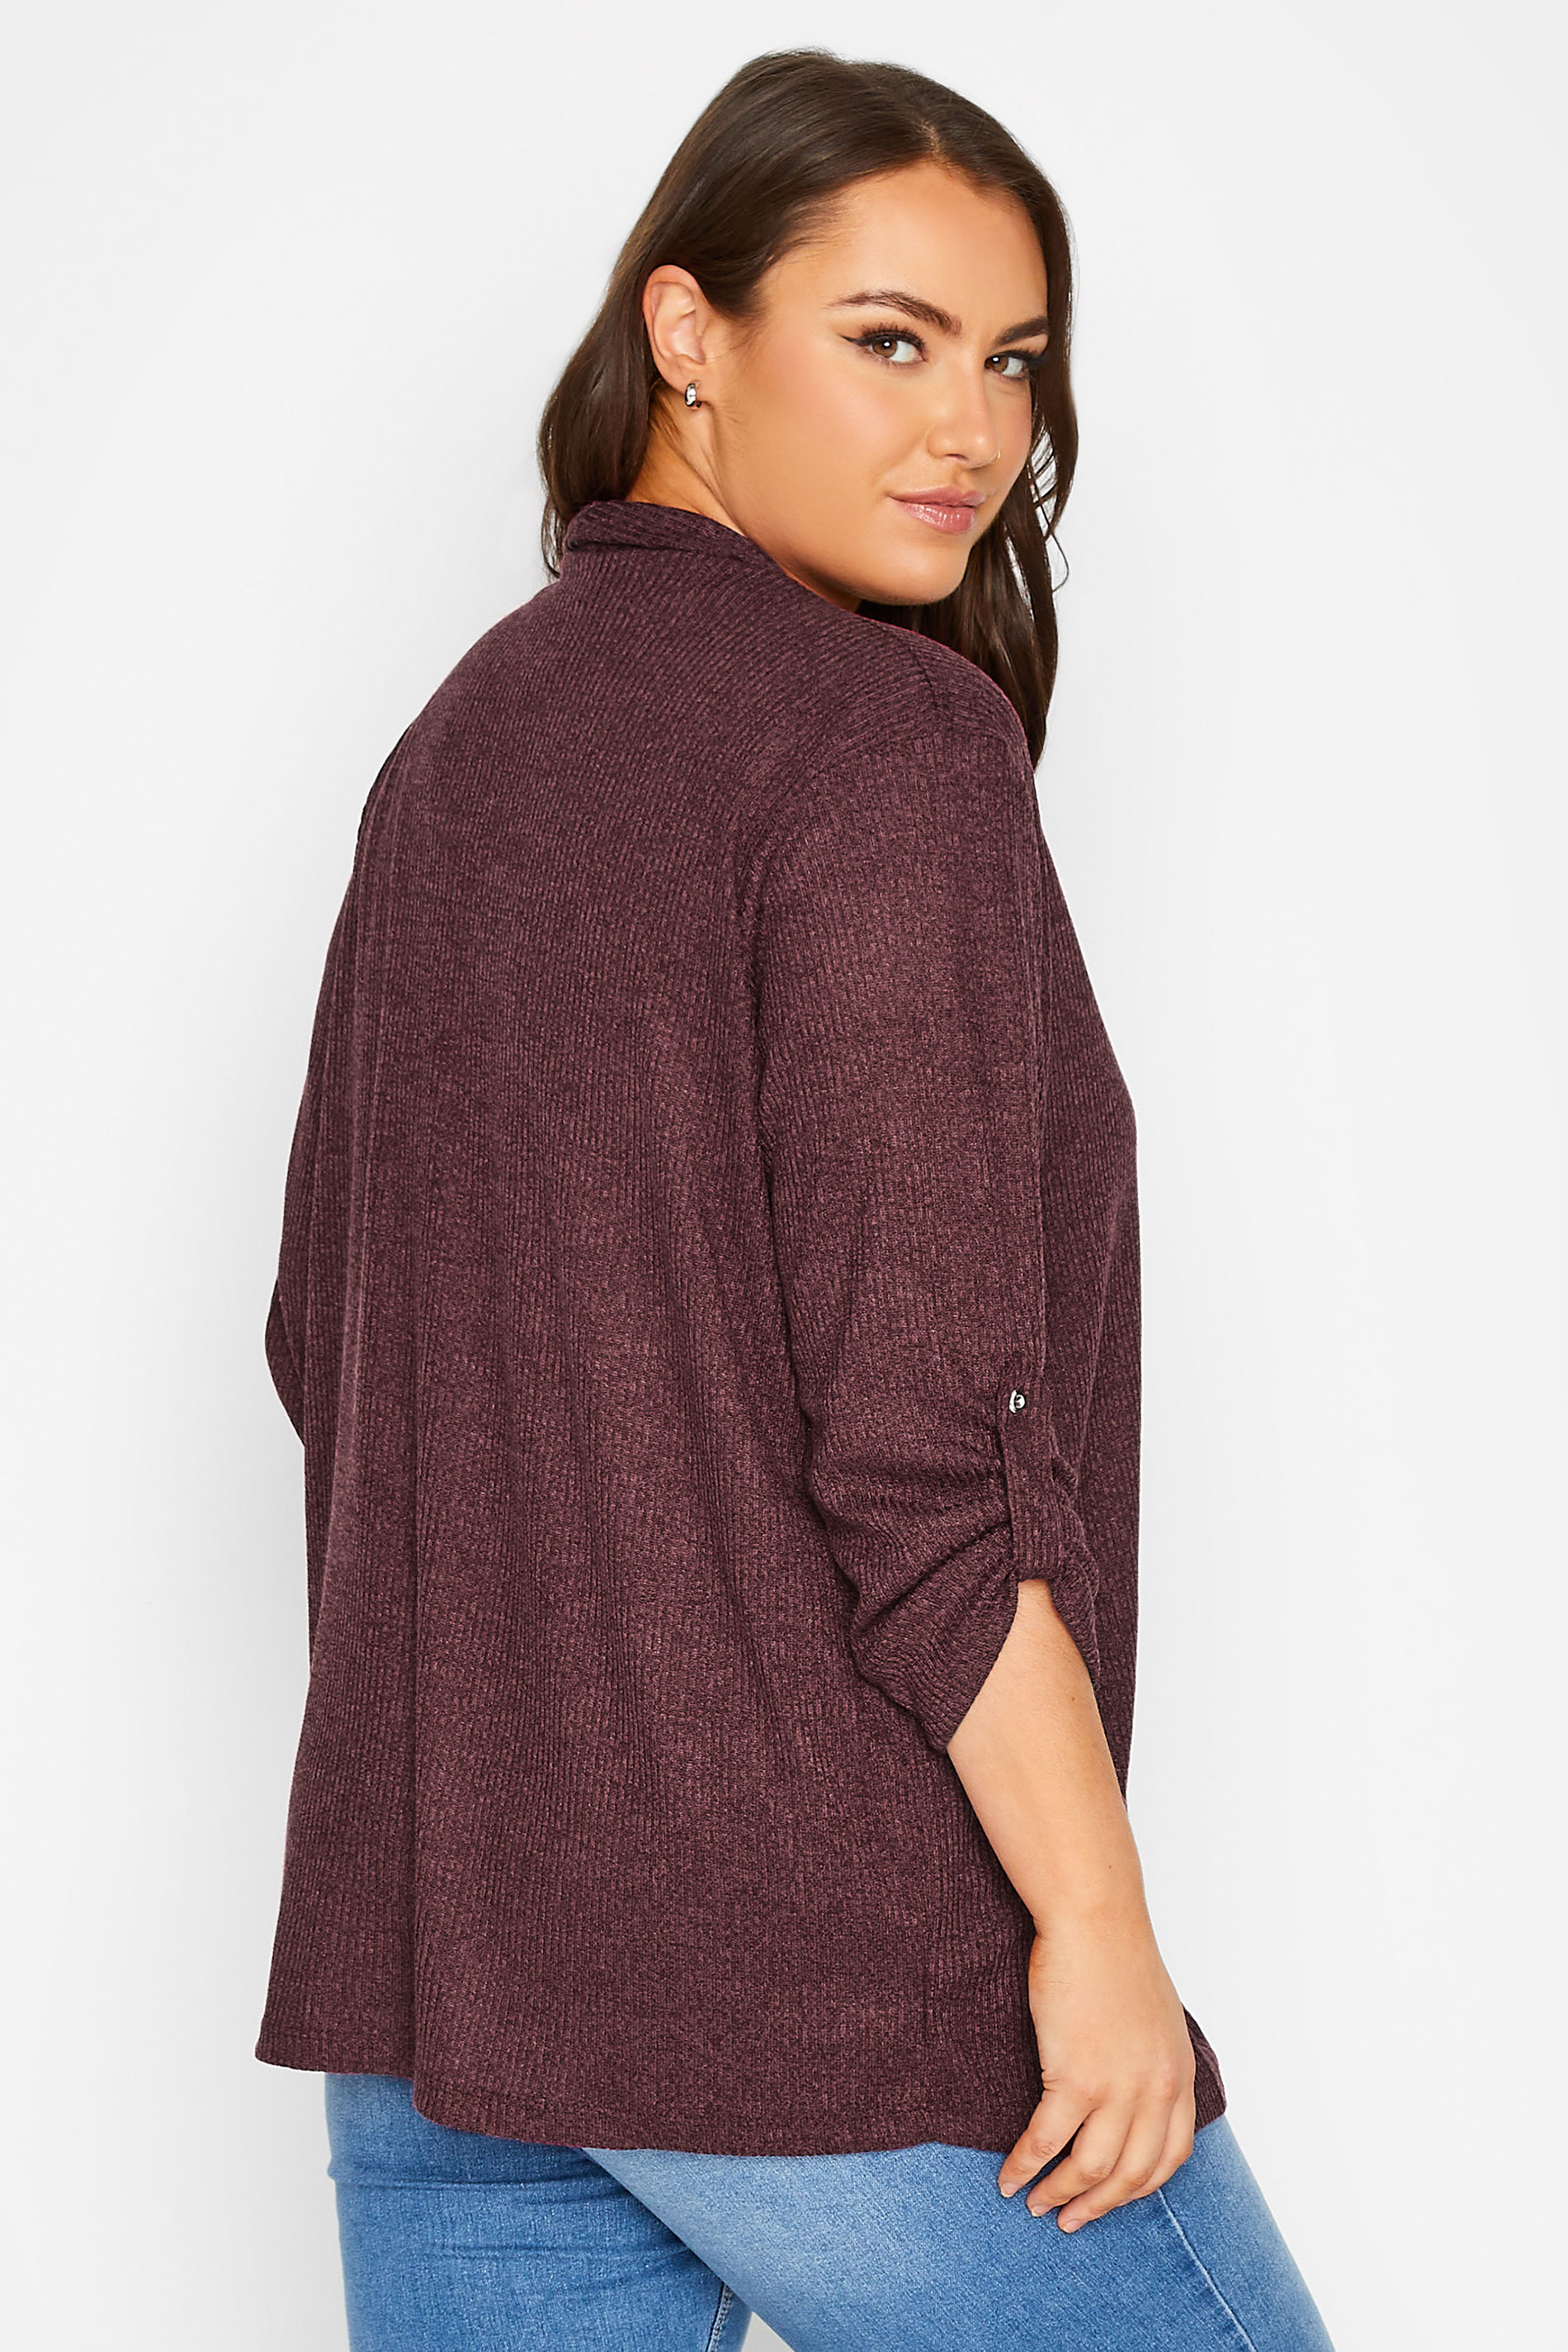 Curve Plus Size Womens Burgundy Red Knit Cardigan | Yours Clothing 3